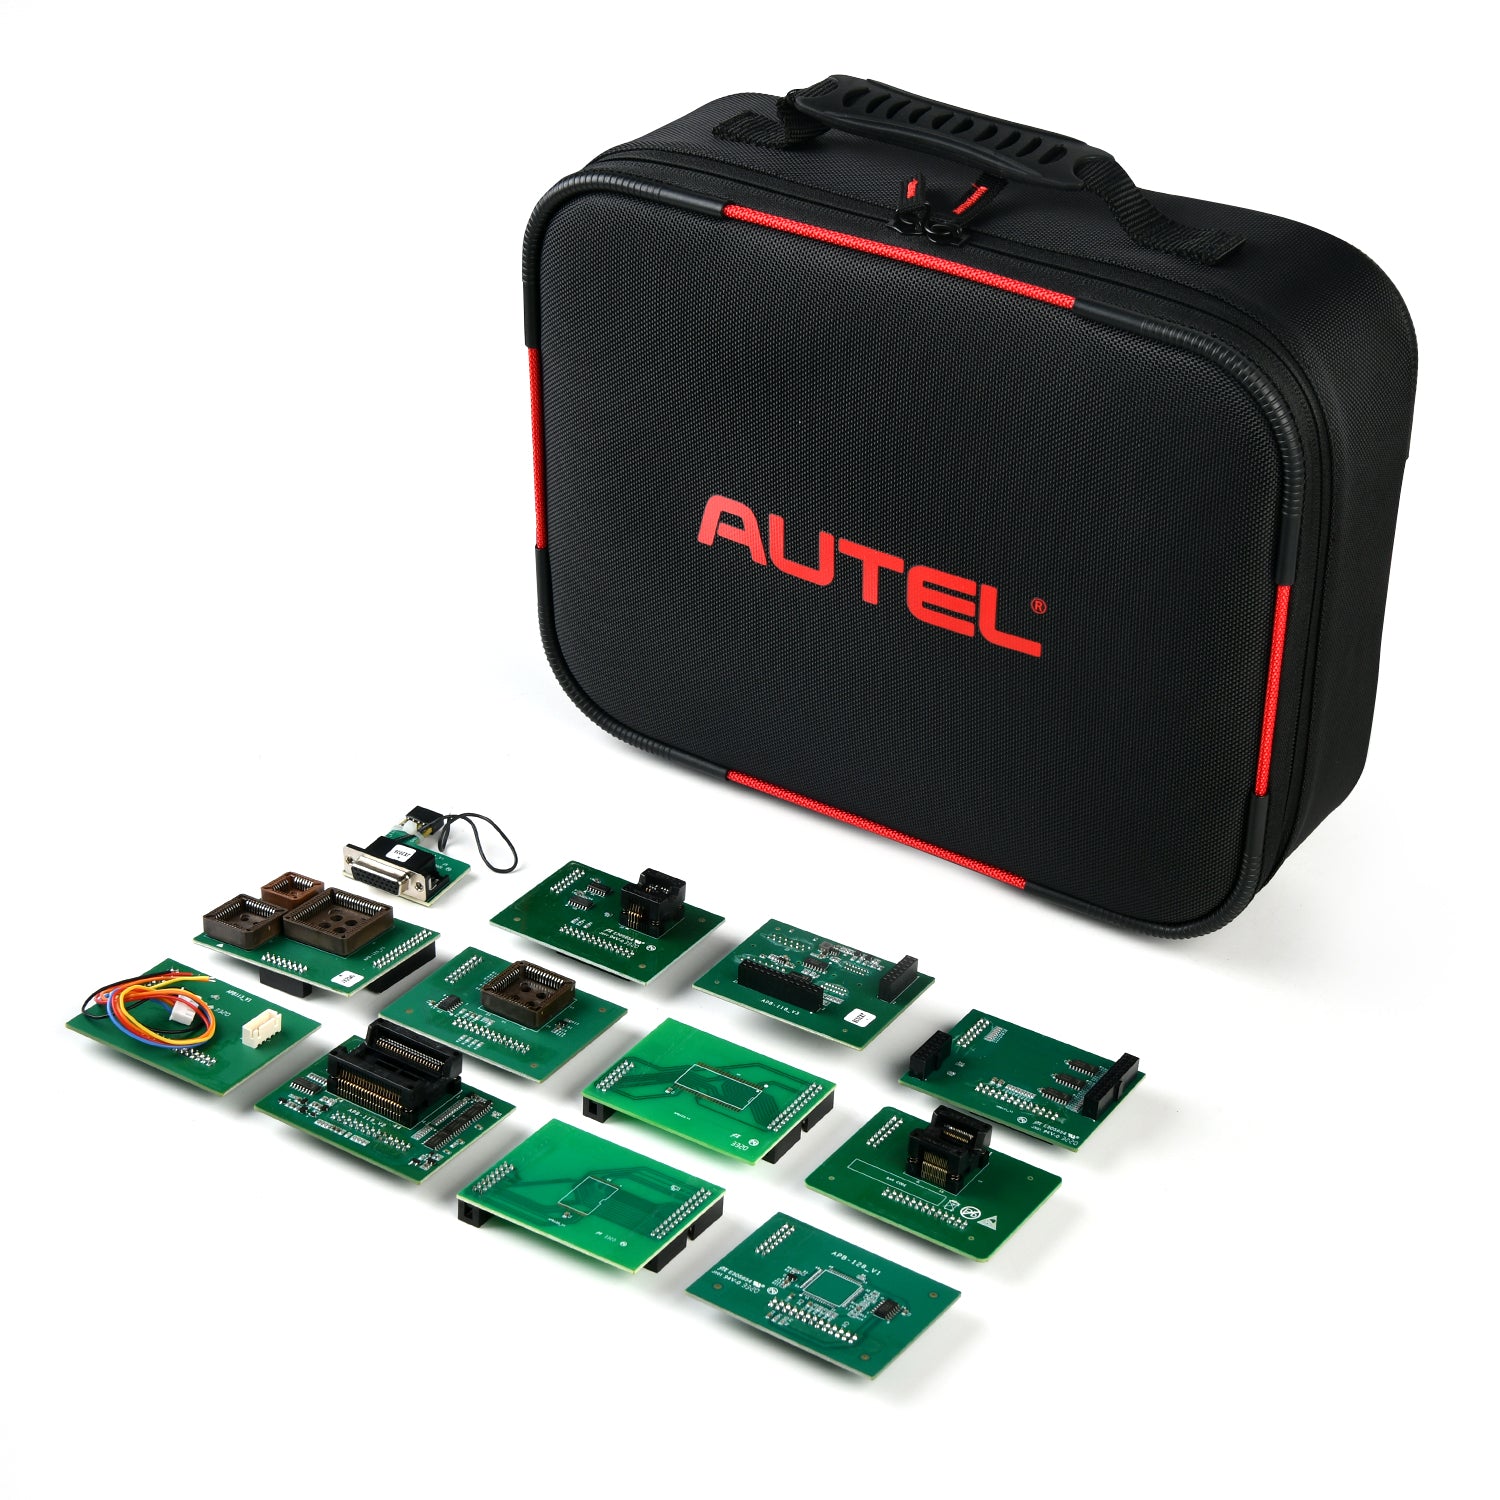 Autel MaxiIM IM608 Pro is the best programming and diagnostic tools